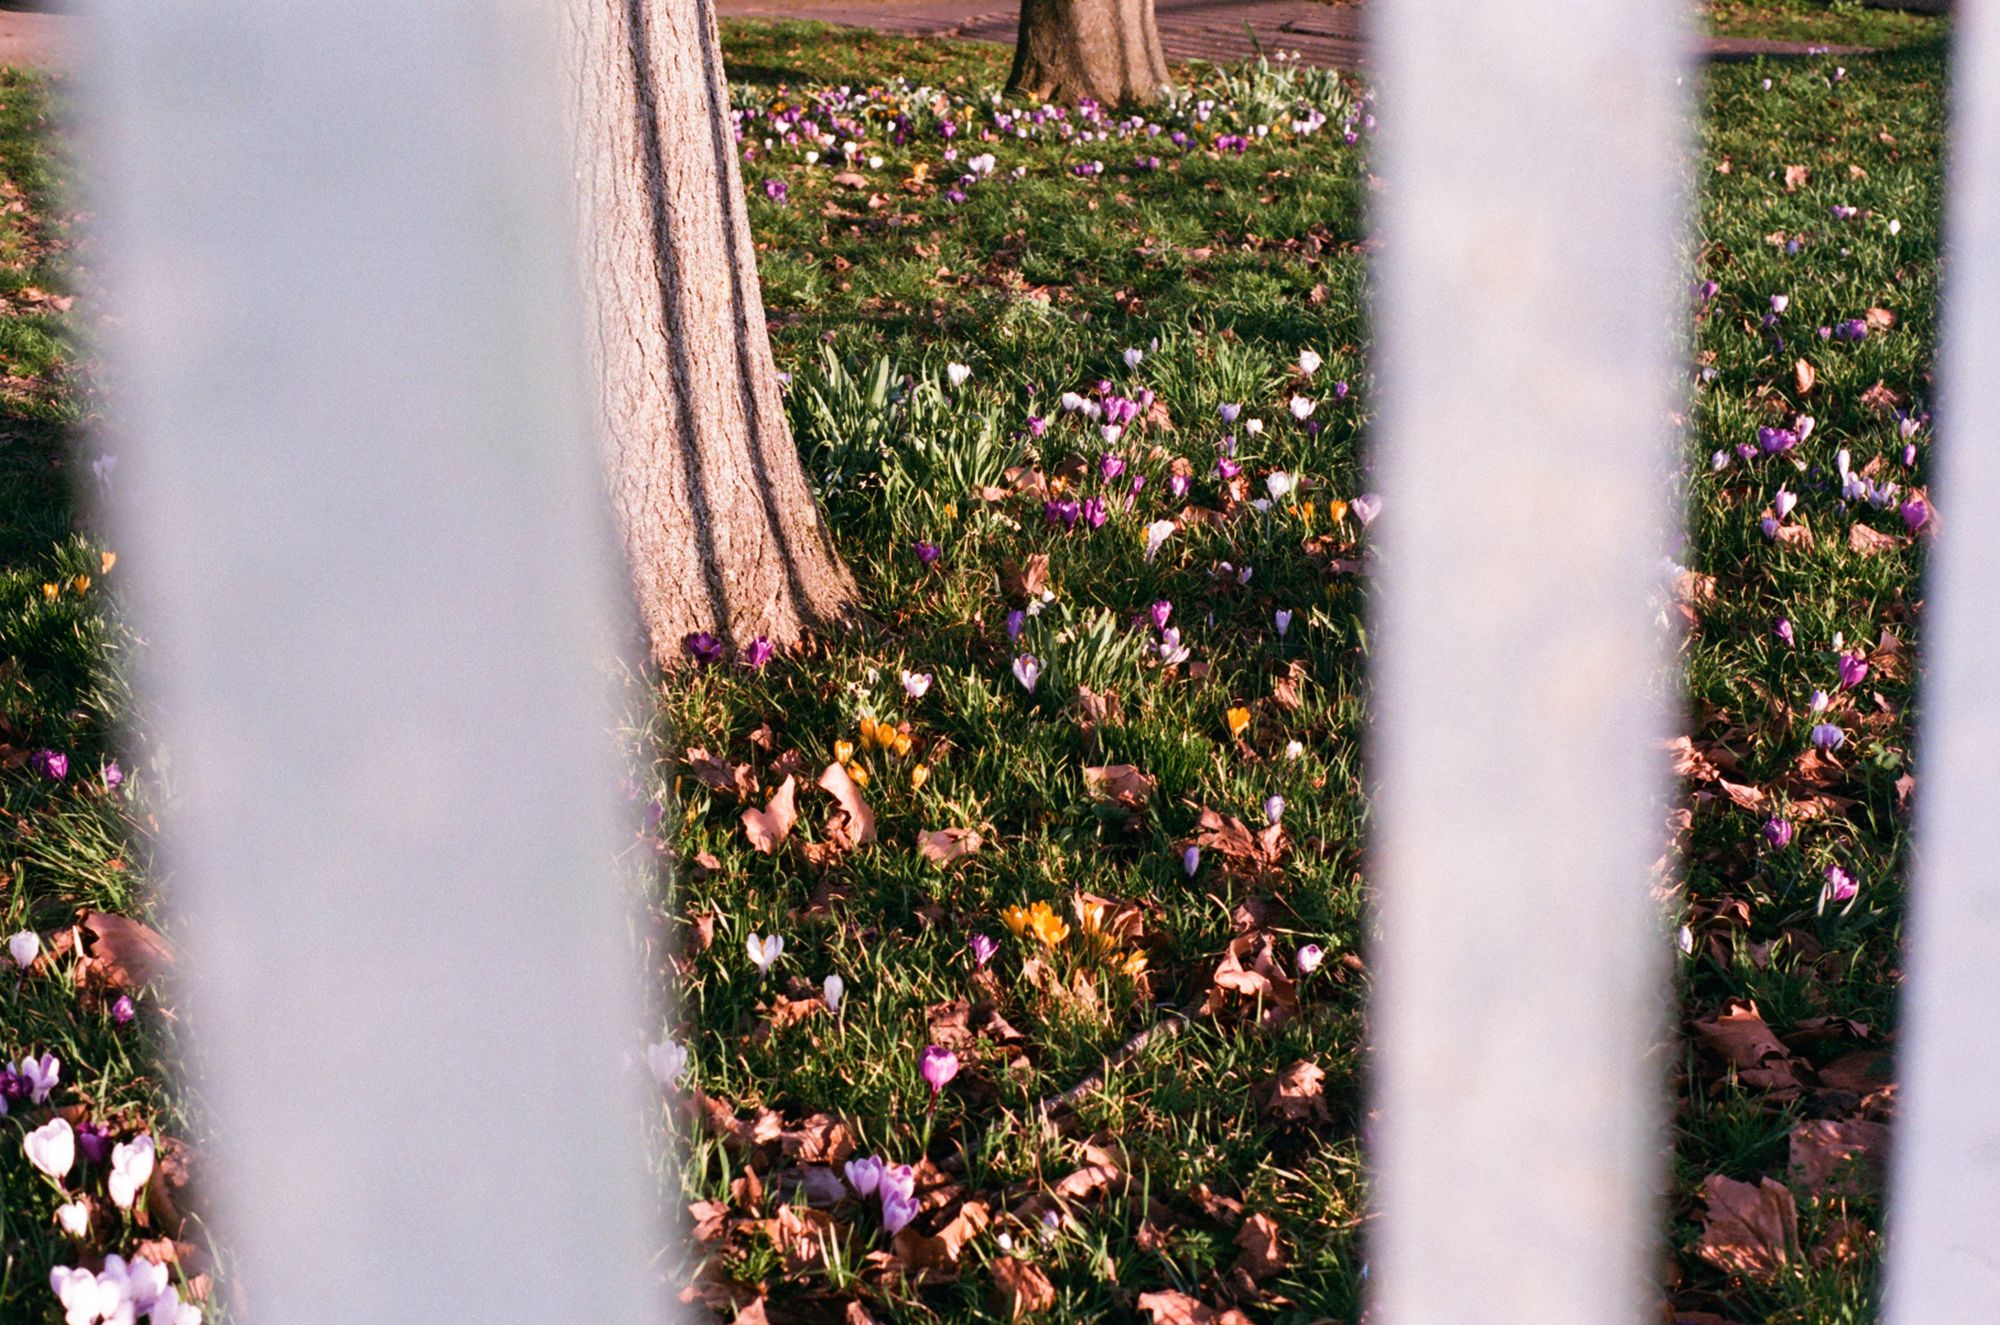 Through a metal fence, yellow, white, and purple crocuses emerge from the grass under trees in warm sunshine.